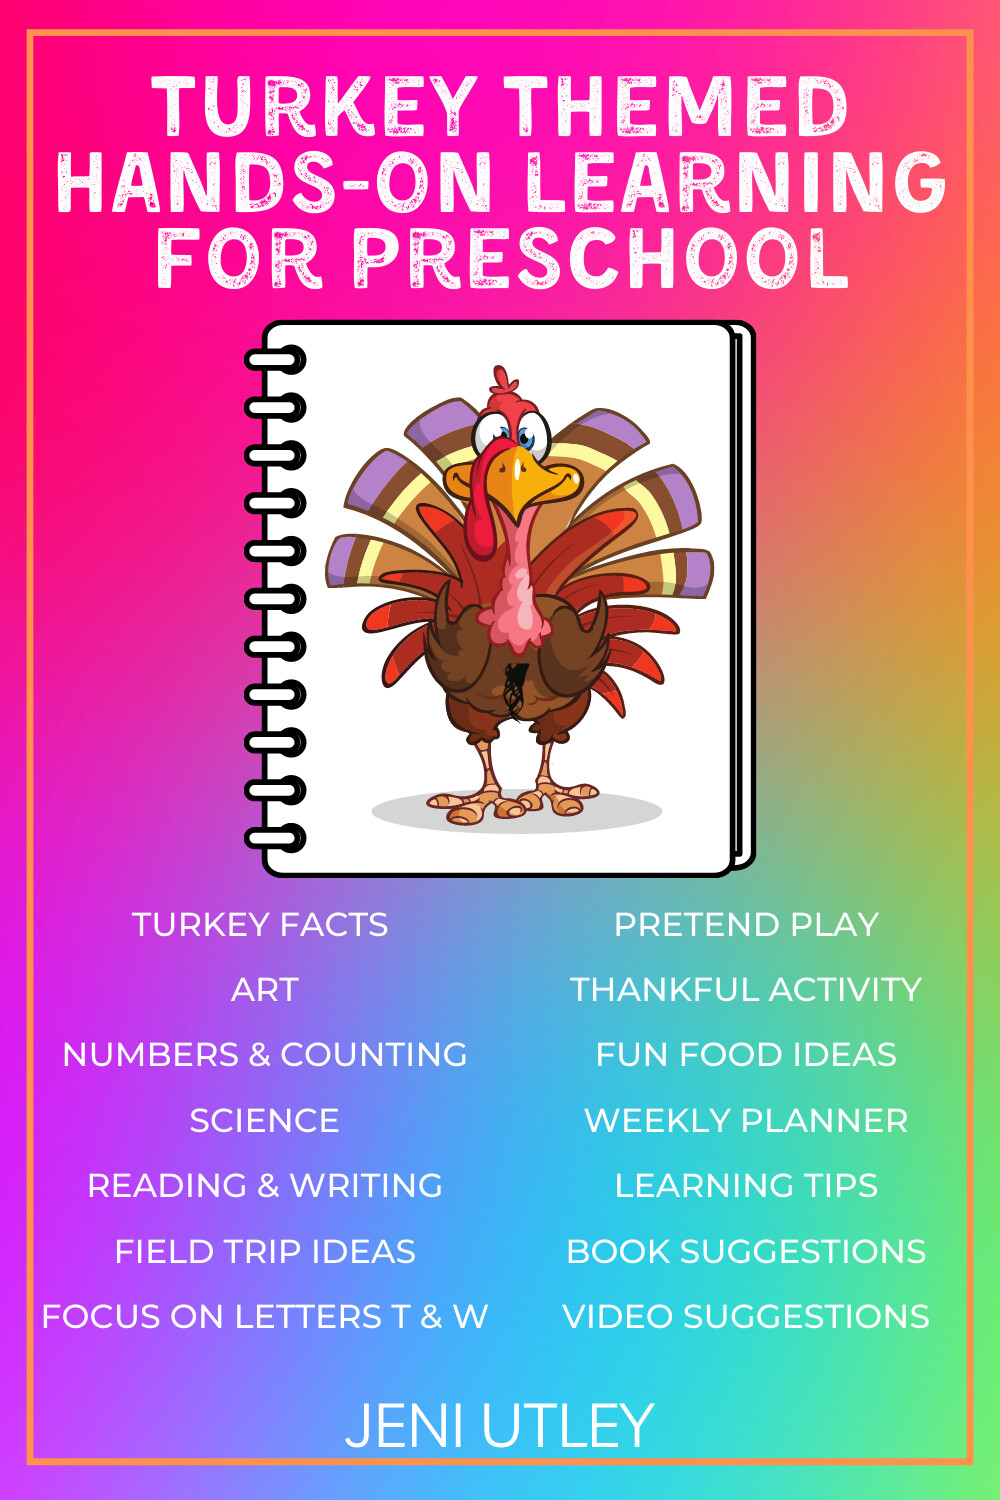 TURKEY / THANKSGIVING LEARNING ACTIVITIES FOR PRESCHOOLERS